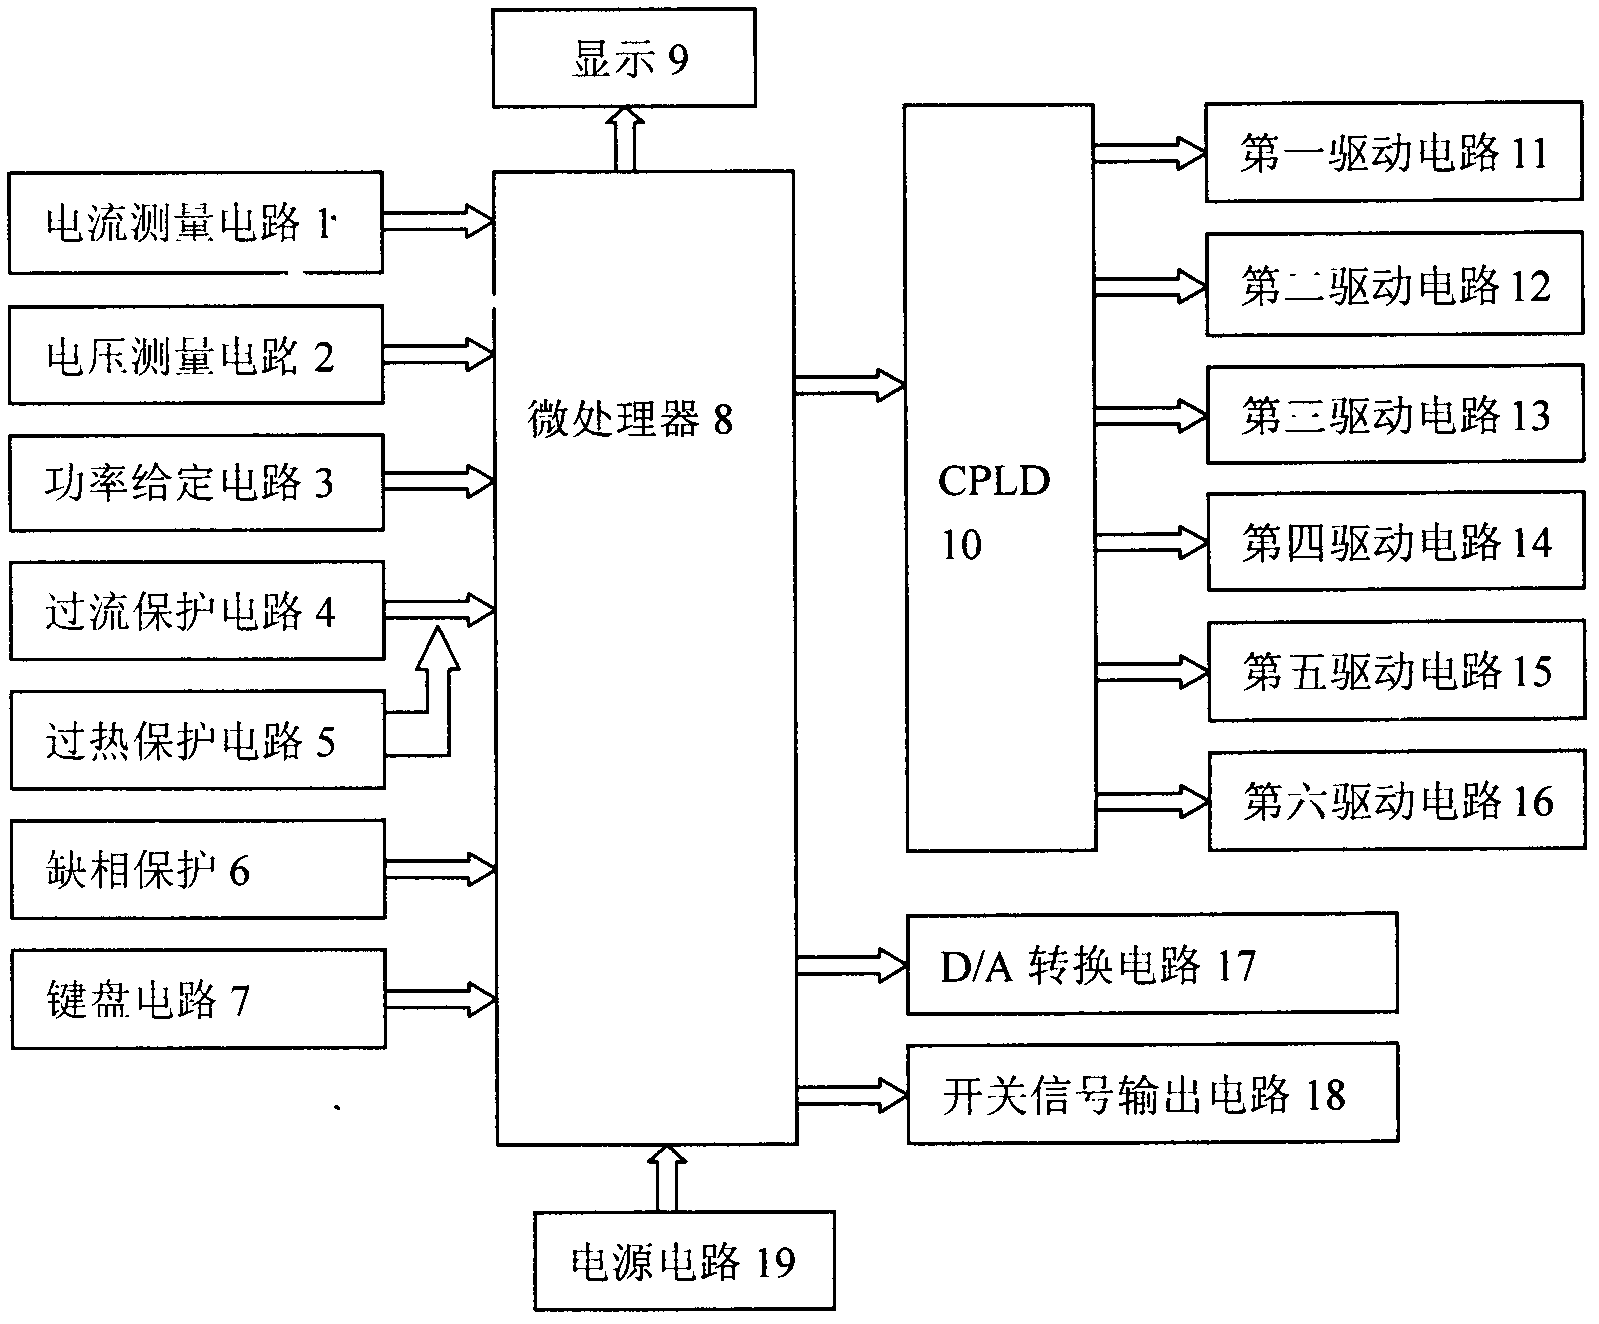 Digital large-power high-frequency inversion controller for direct-current power supply and method of controller